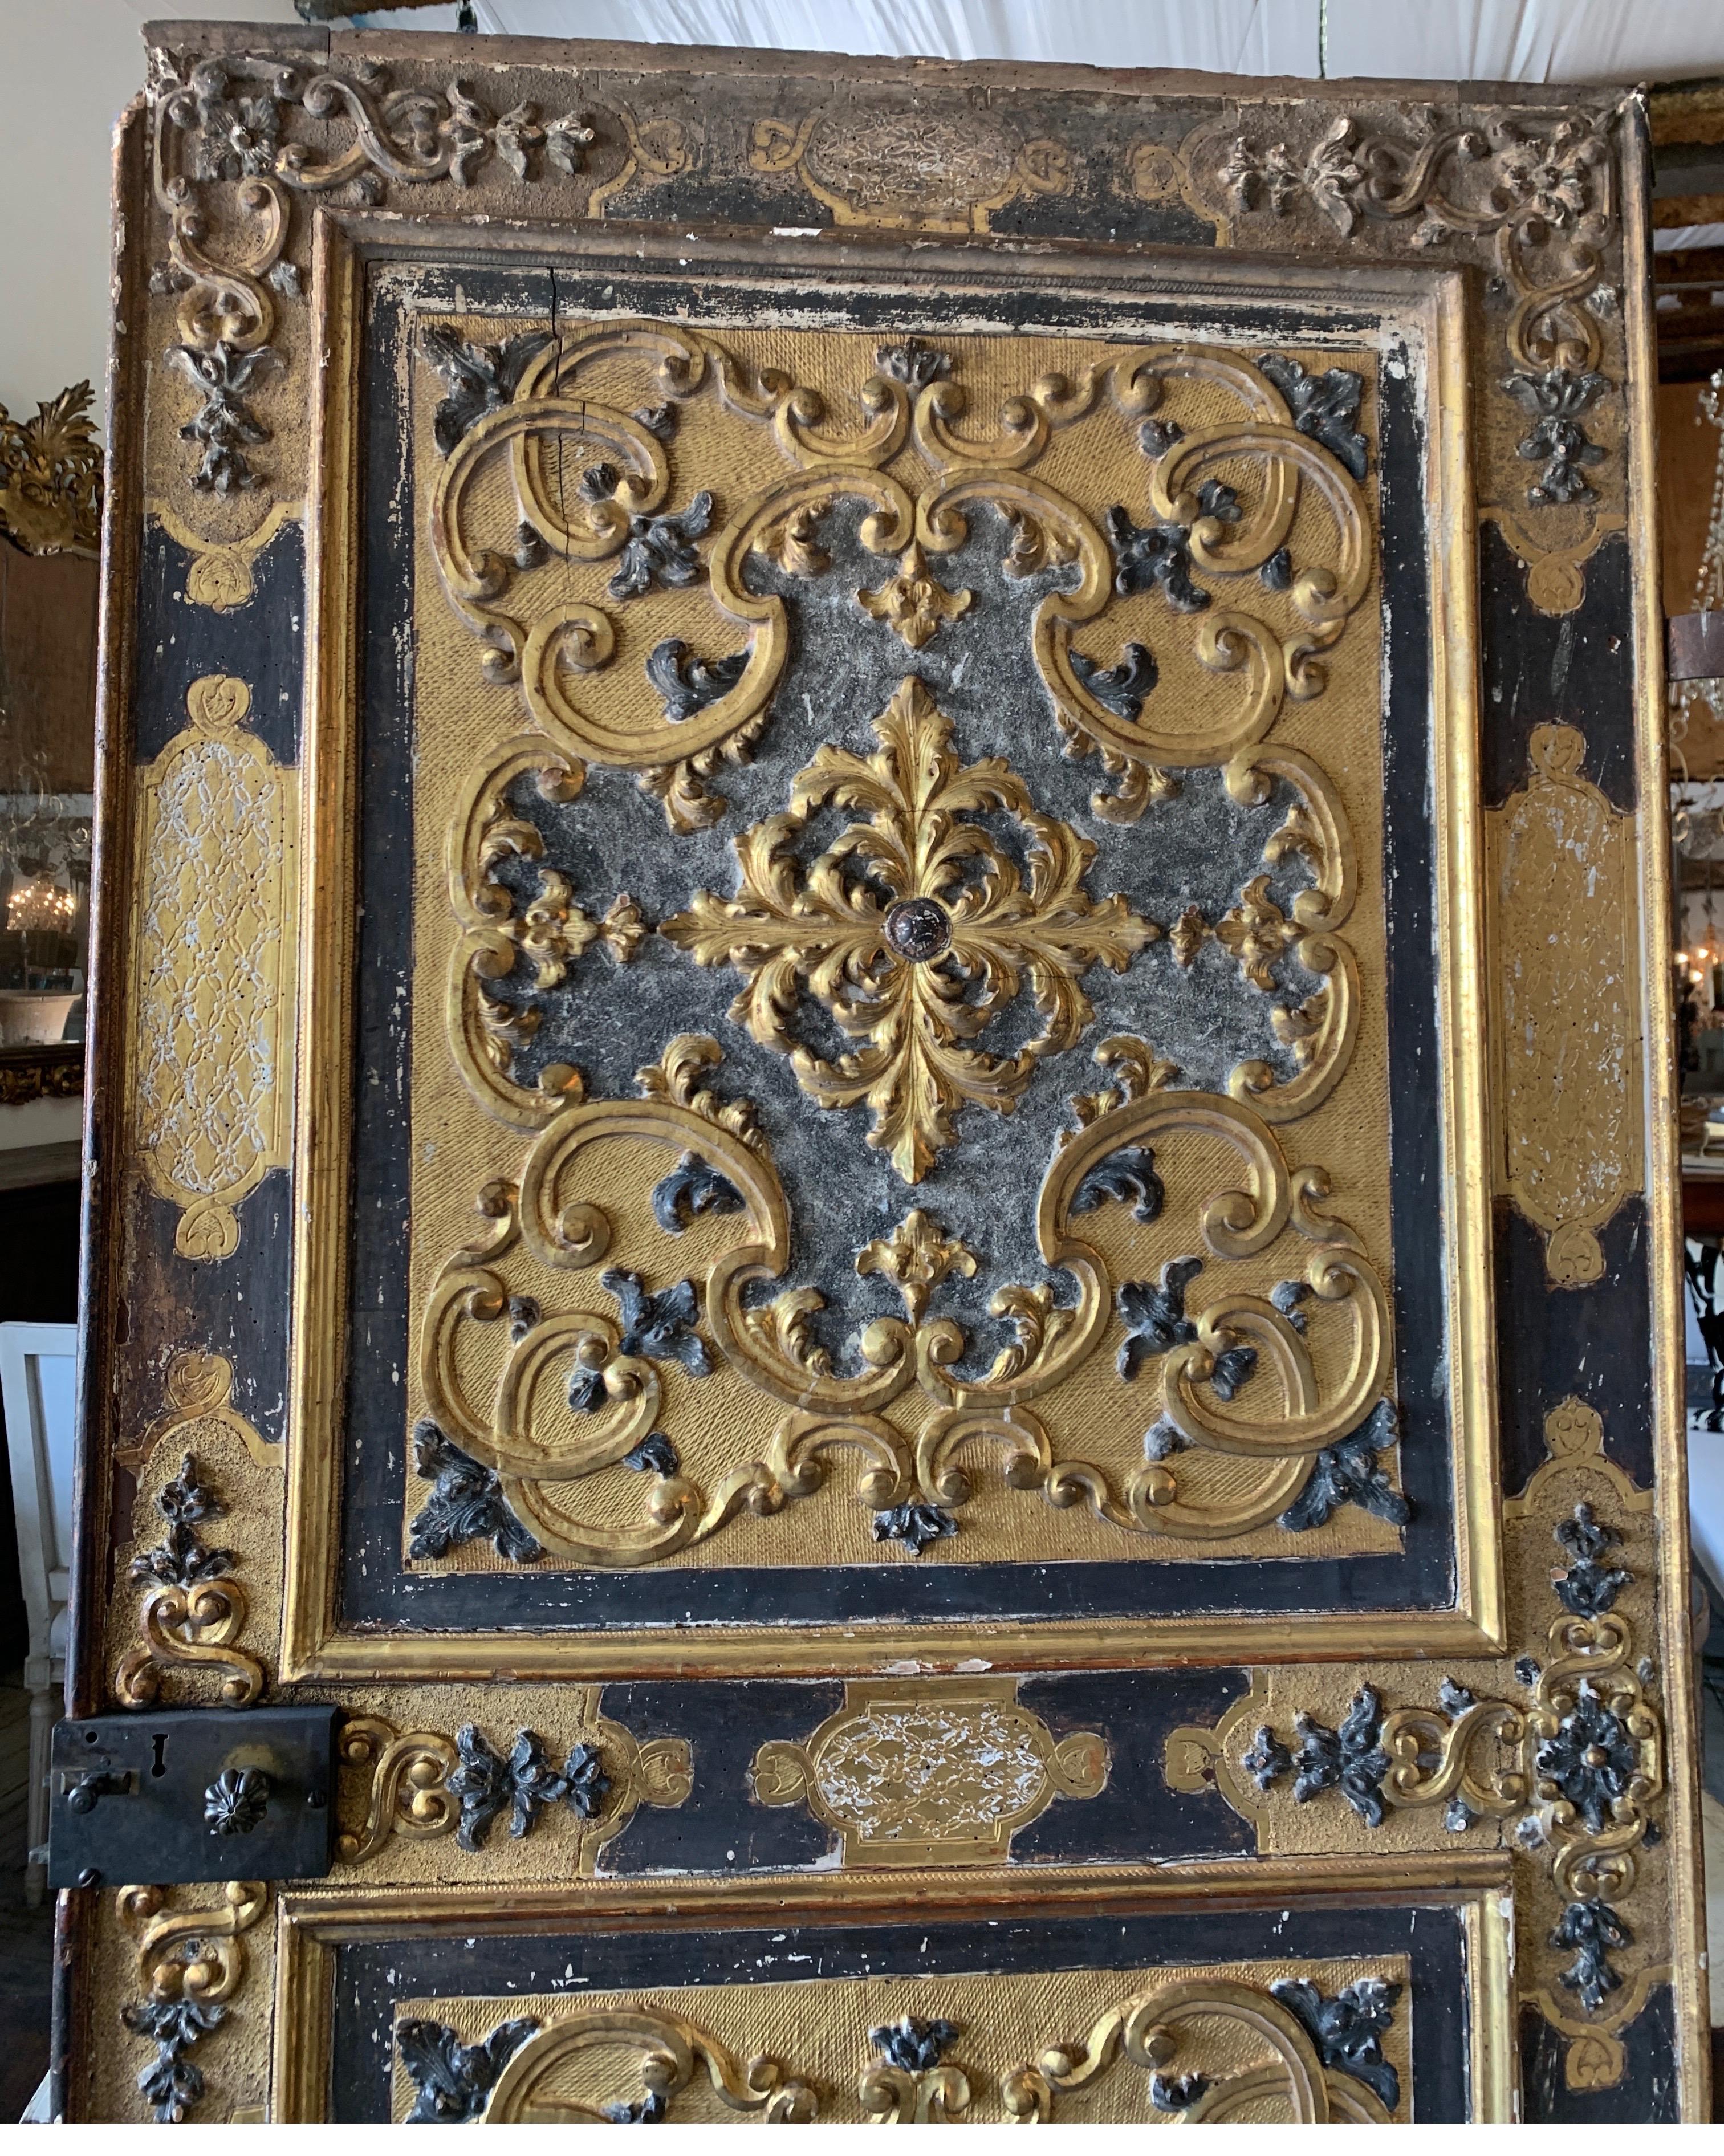 This beautiful door originated from the Torino region of Piedmont in Italy. It comes from a Villa and is a wonderful statement piece for your room. It’s gilt is original and all the hardware as well. There is one side at the bottom where the trim is